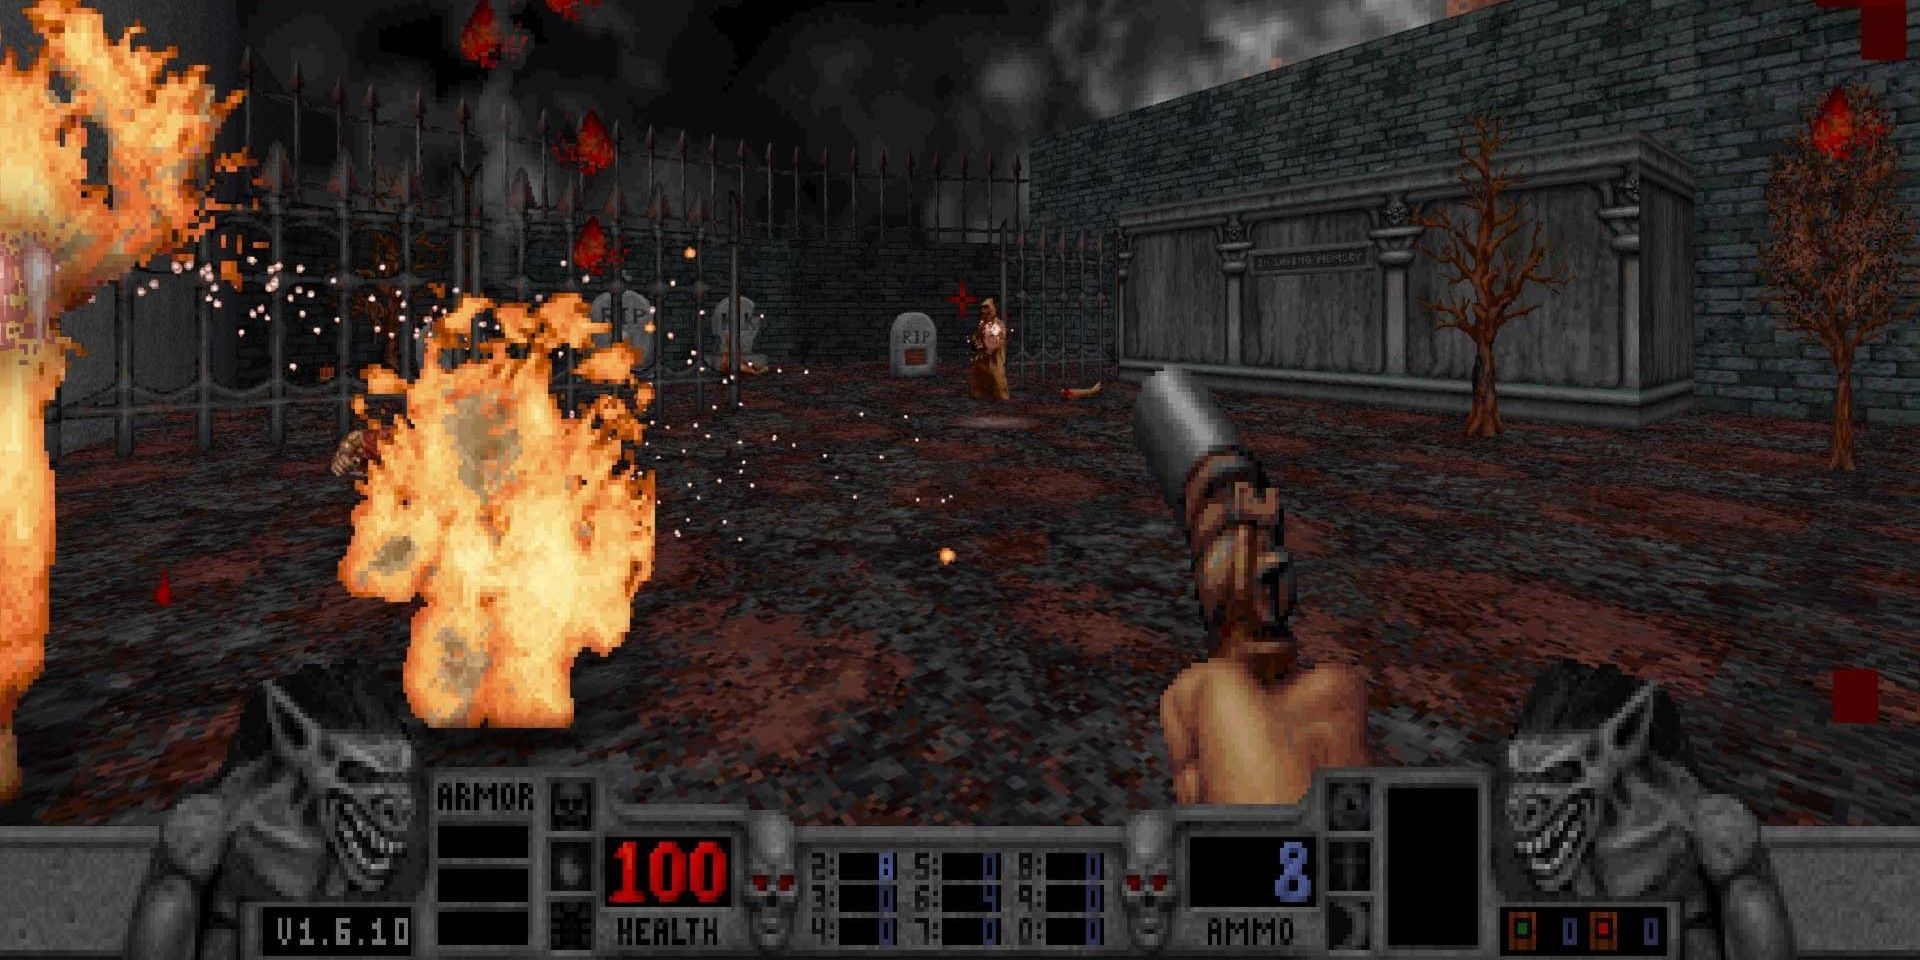 A player fires a flare at an enemy while others burn